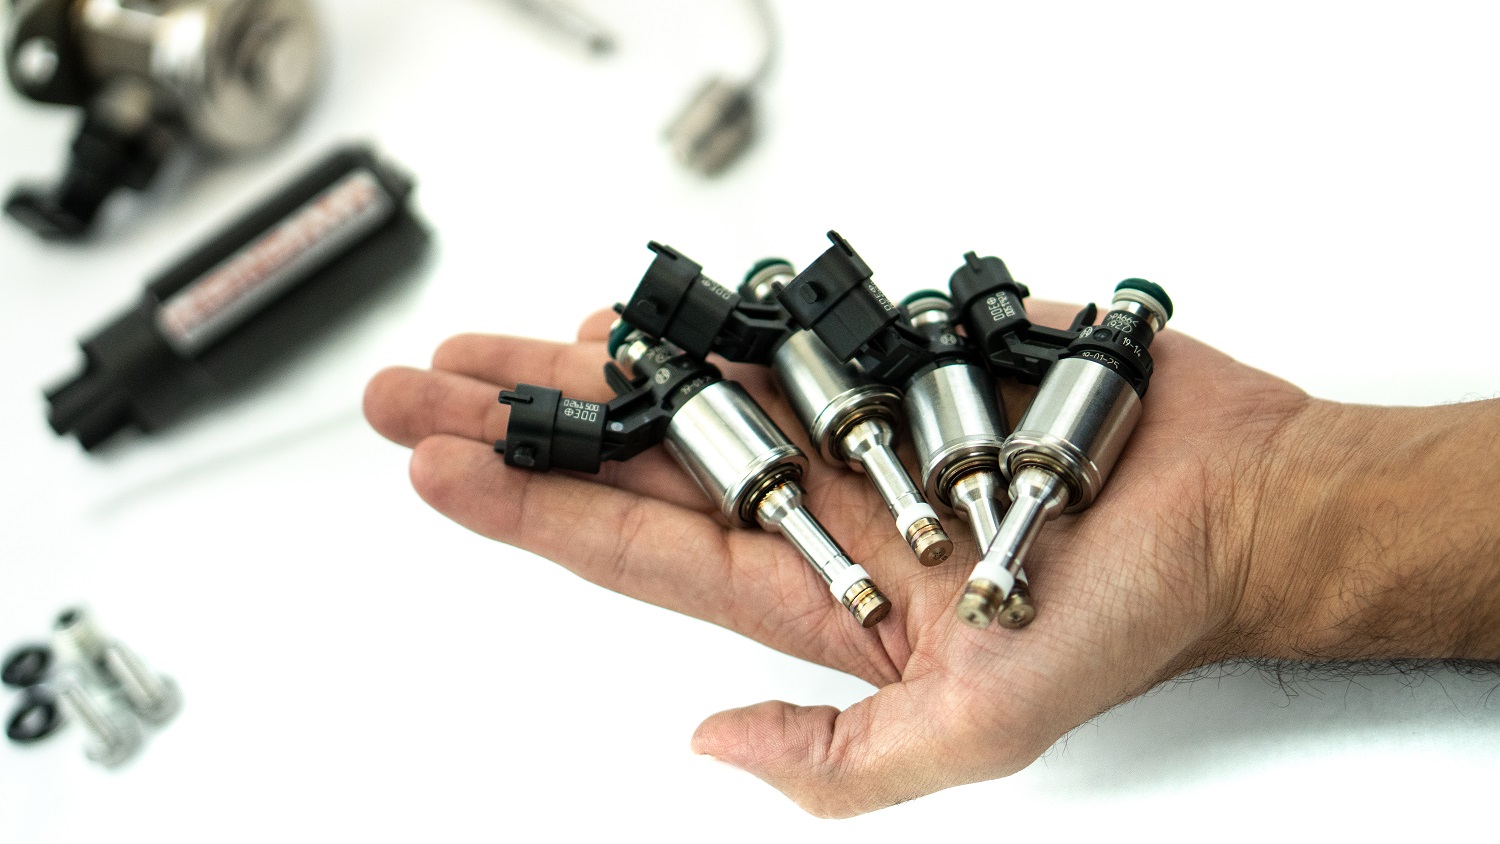 Upgraded fuel injectors flow 20% more than stock